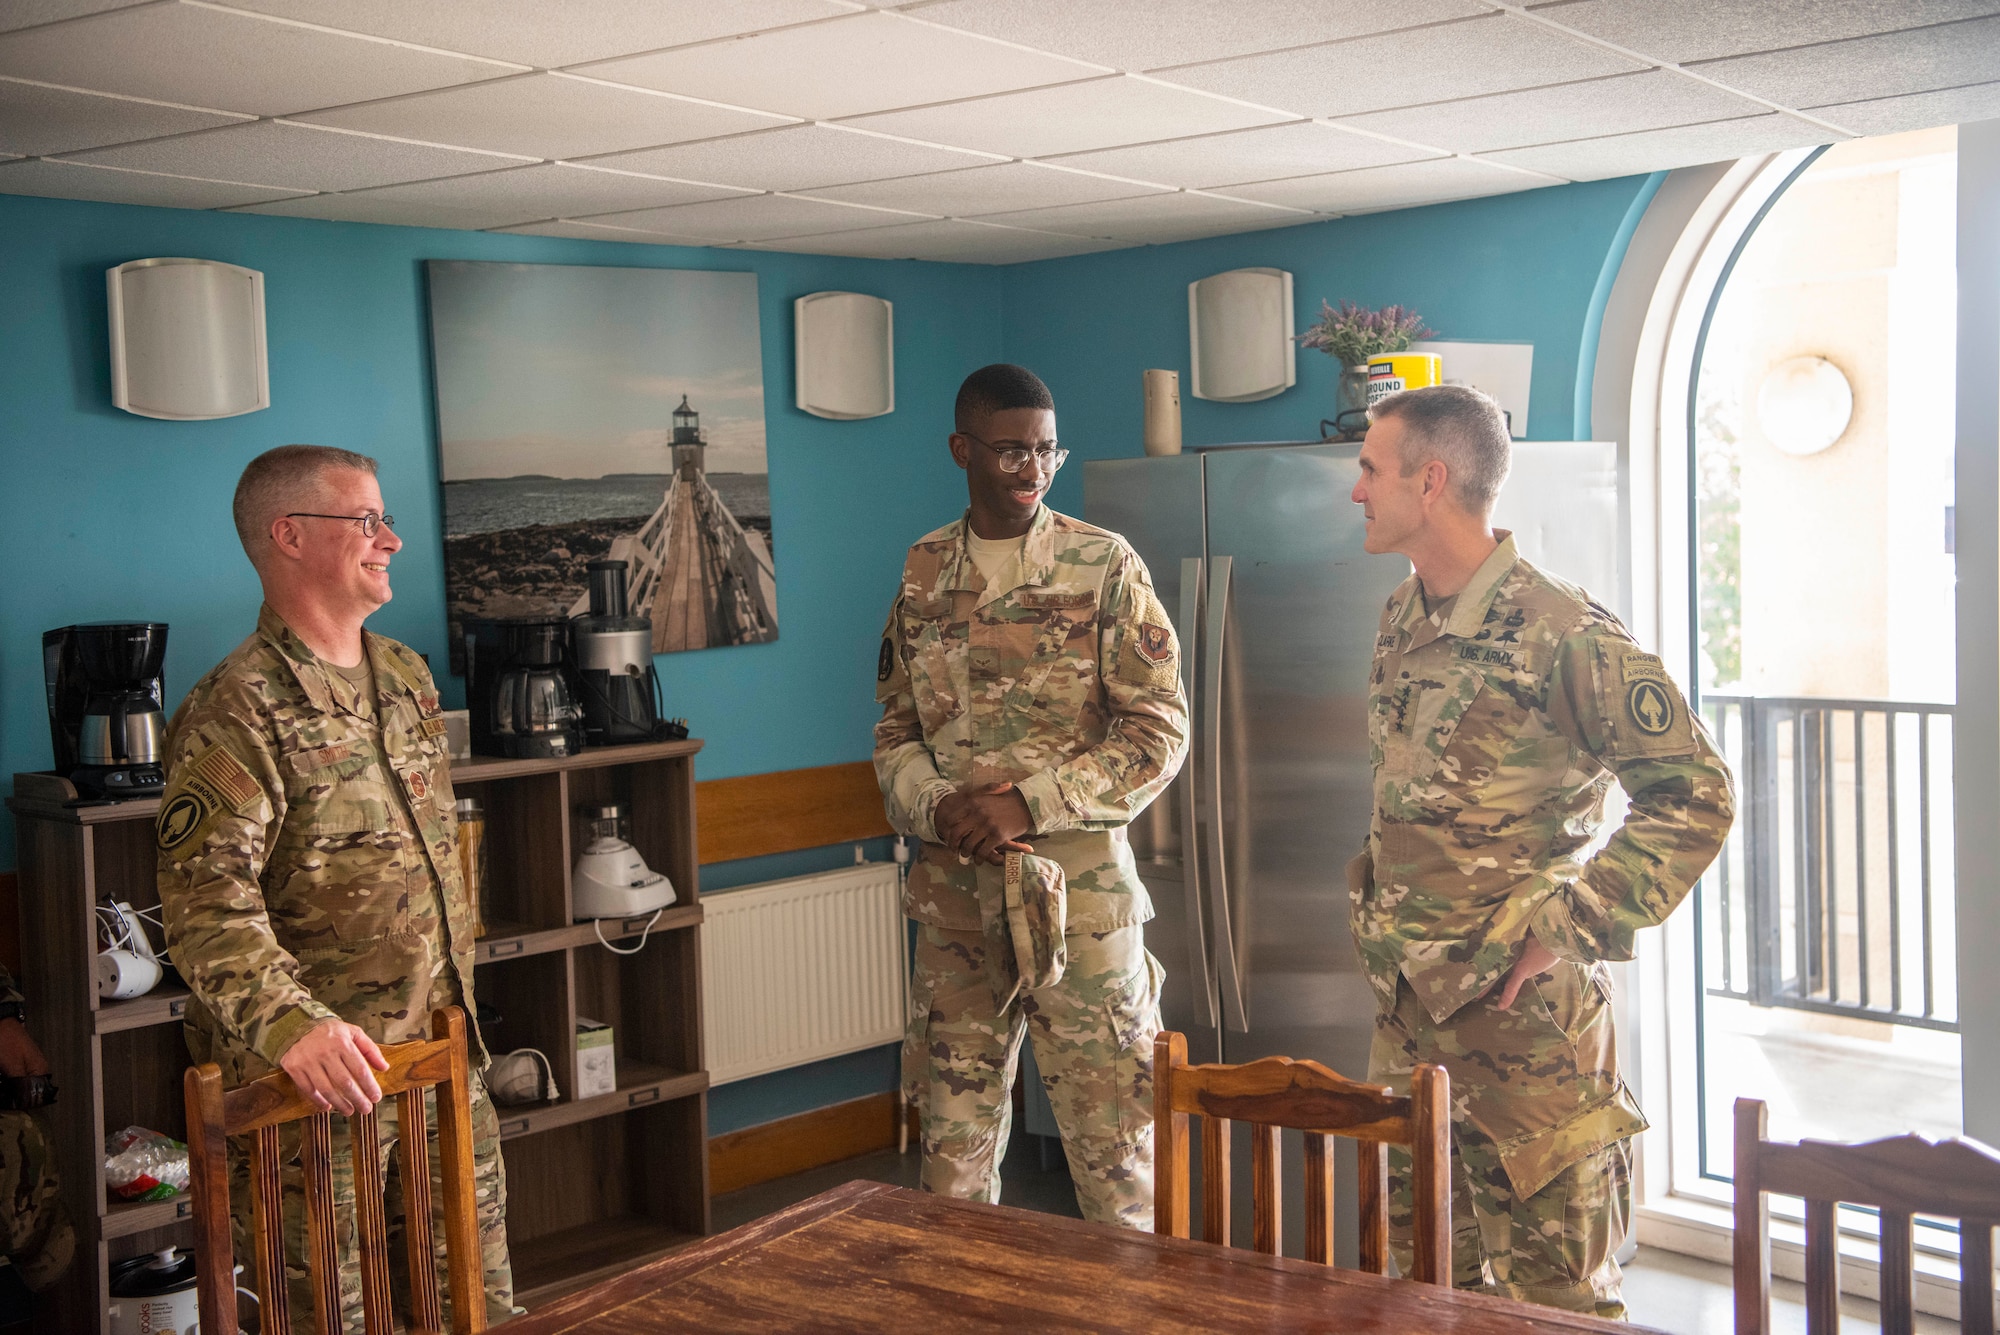 U.S. Army Gen. Richard D. Clarke, United States Special Operations Command commander, tours a 352nd Special Operations Wing dorm at RAF Mildenhall, England, Sept. 12, 2019. The mission of the 352nd SOW, part of Air Force Special Operations Command, is to provide combat ready, responsive, specialized airpower and combat support to execute the full spectrum of SOF missions. (U.S. Air Force photo by Airman 1st Class Joseph Barron)